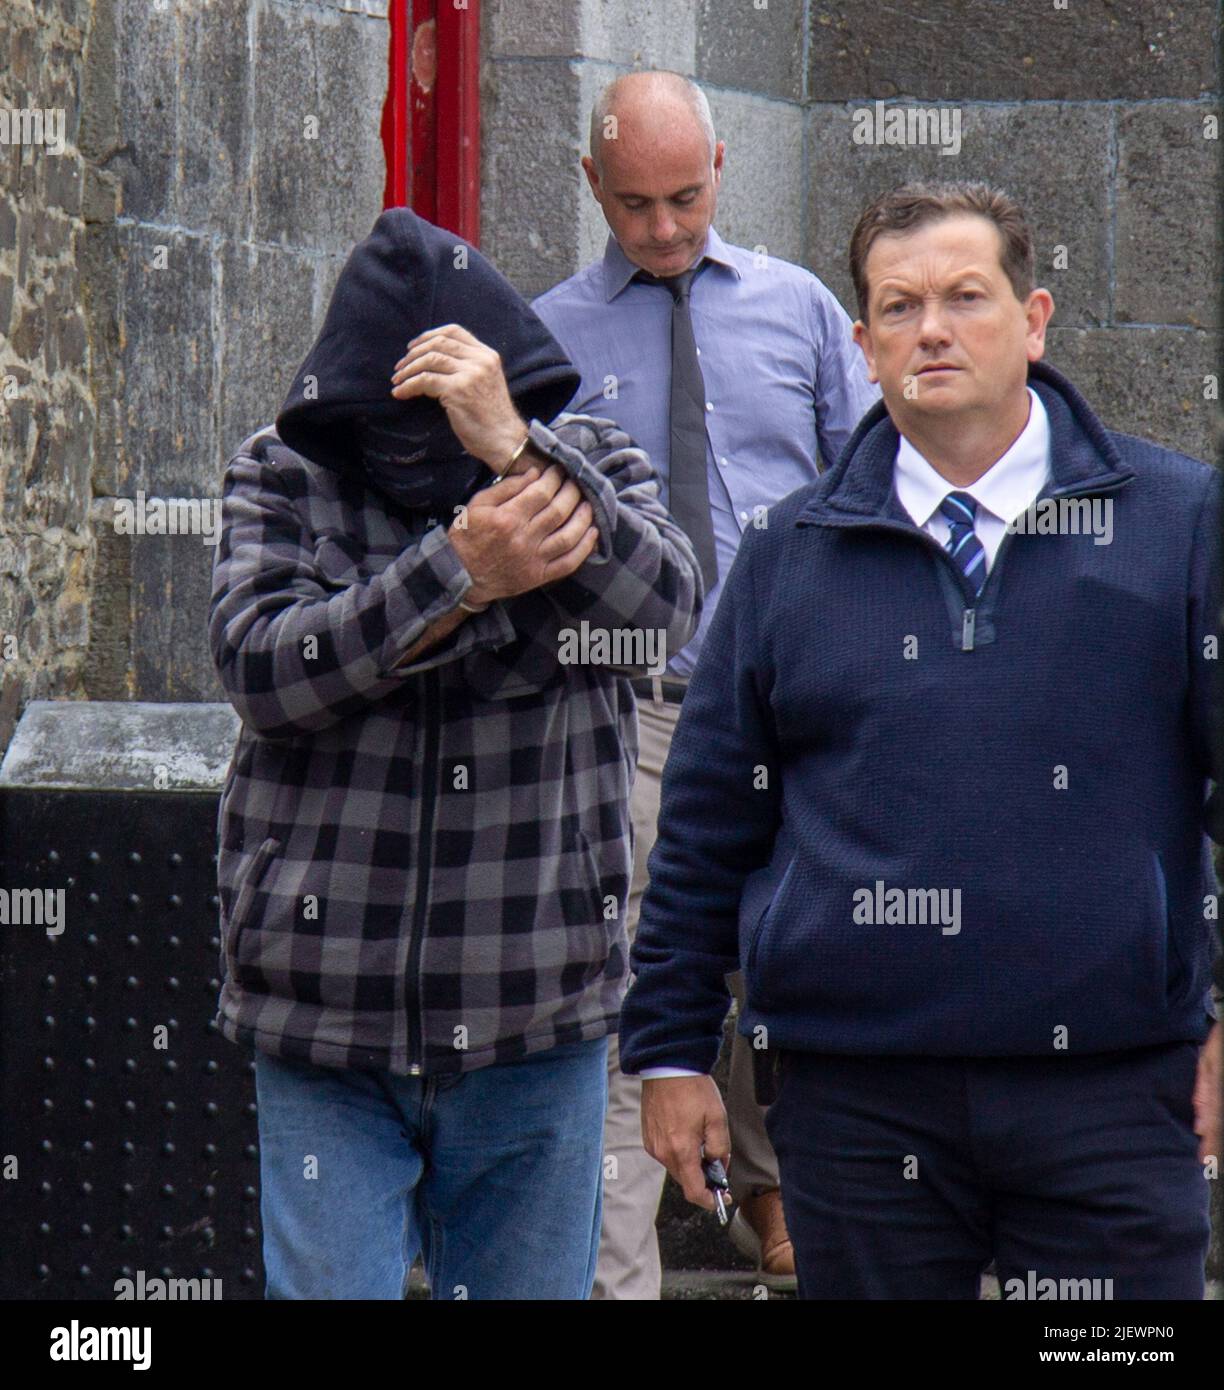 Suspect being led away from court in handcuffs Stock Photo